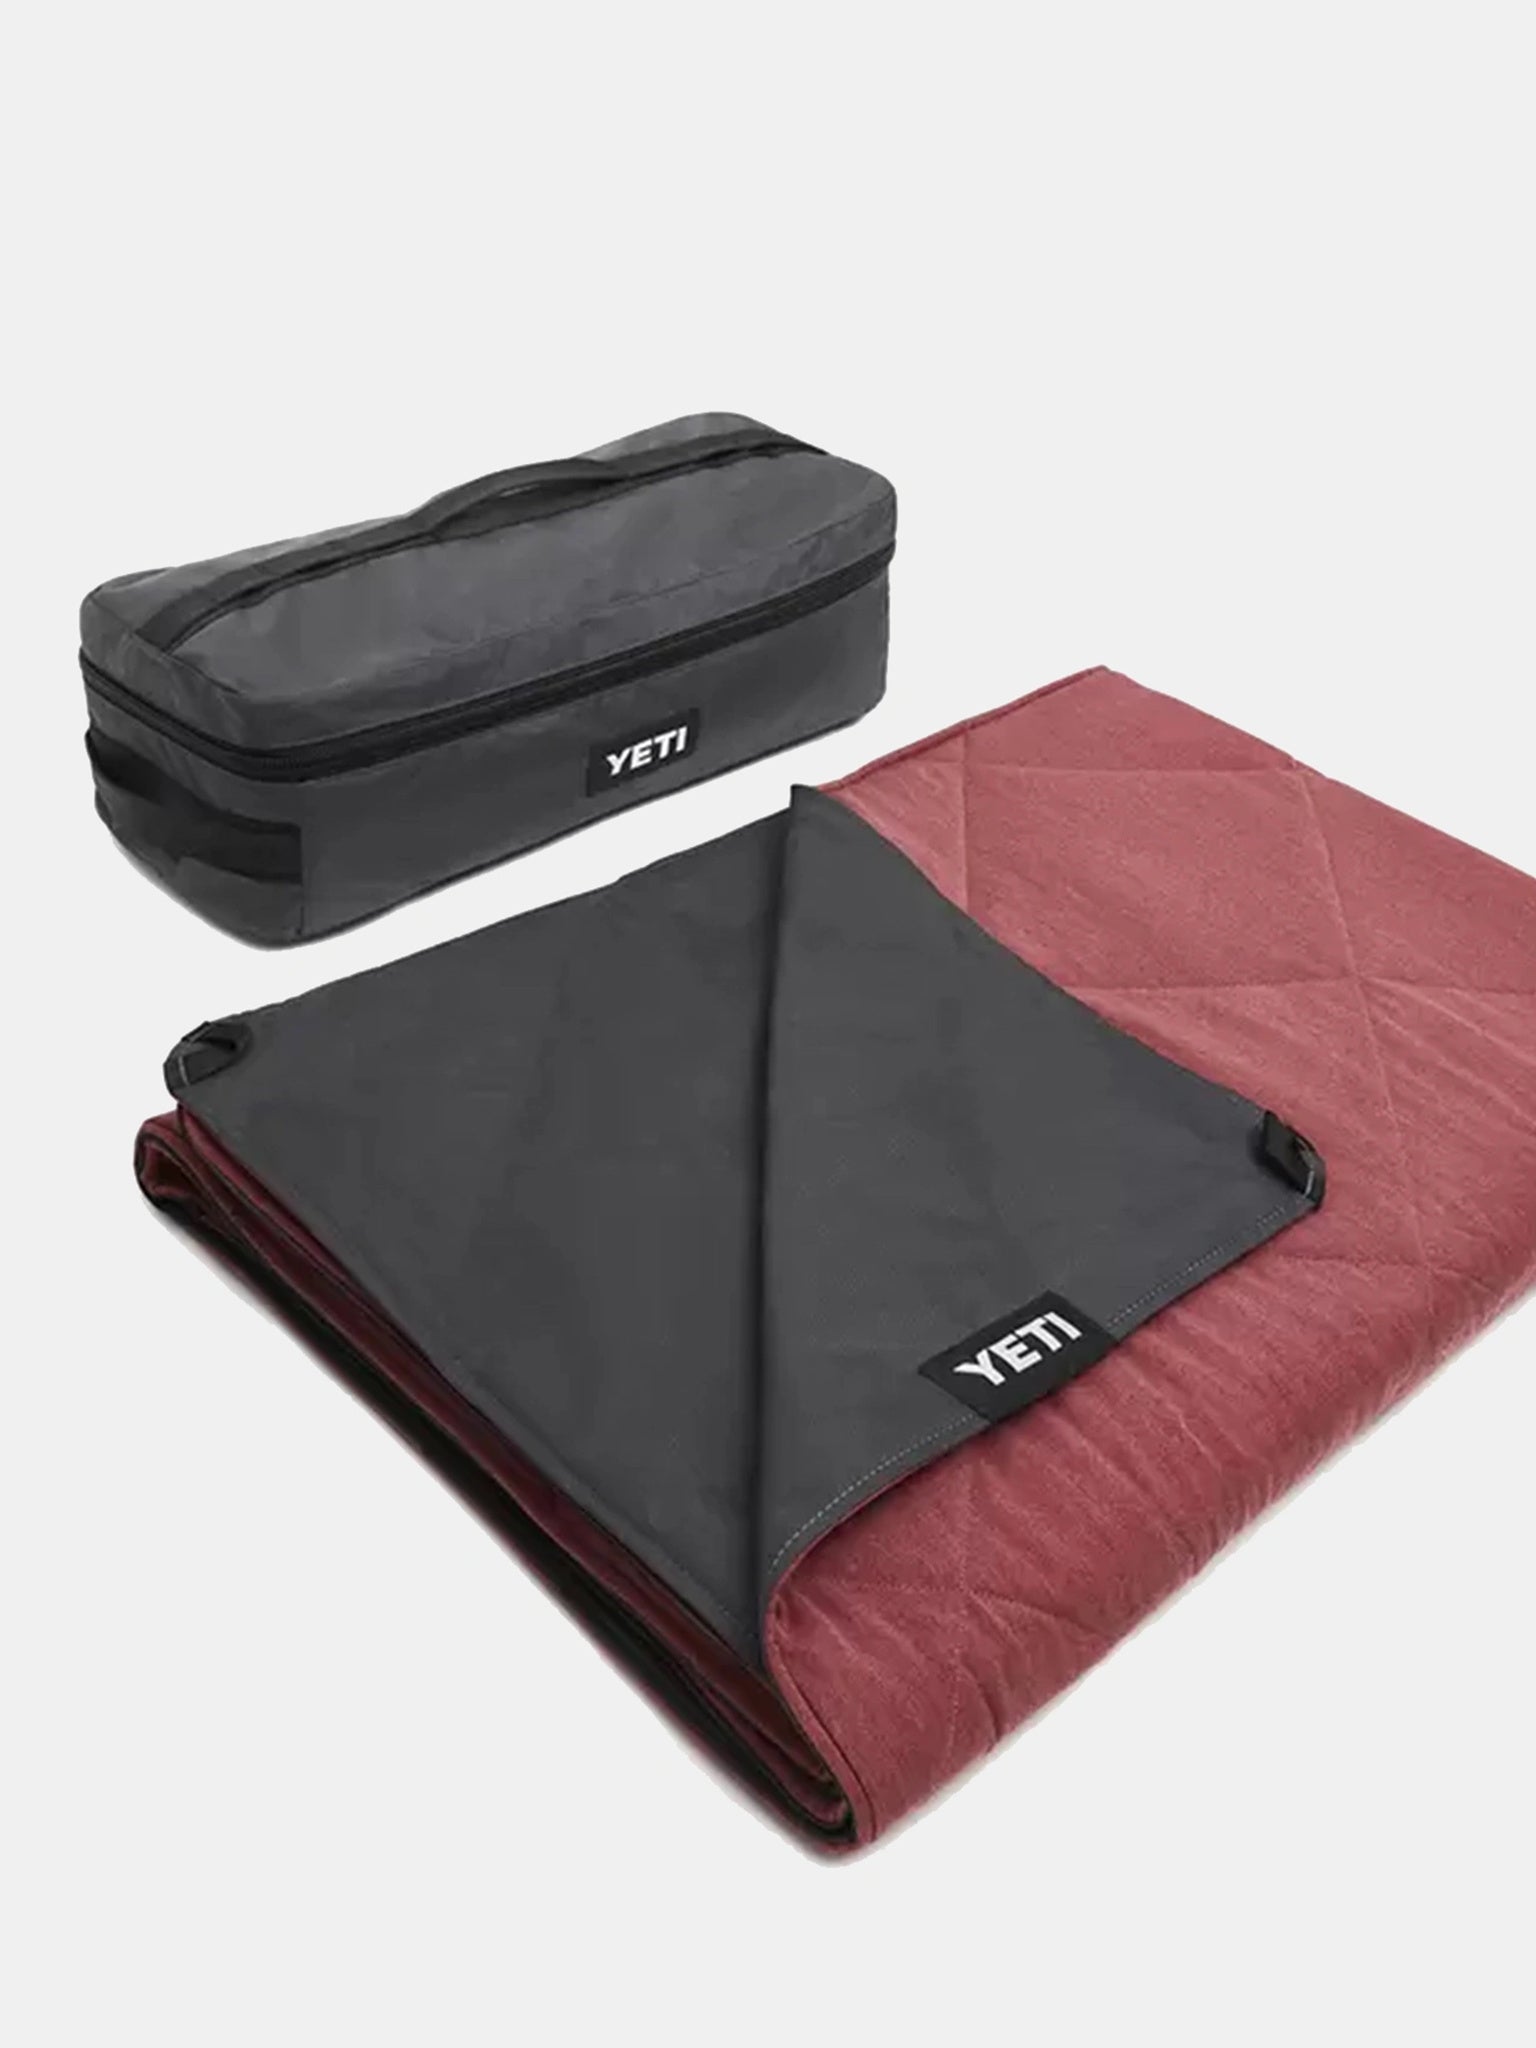 YETI - Now Available: Lowlands Blanket - Cover all your